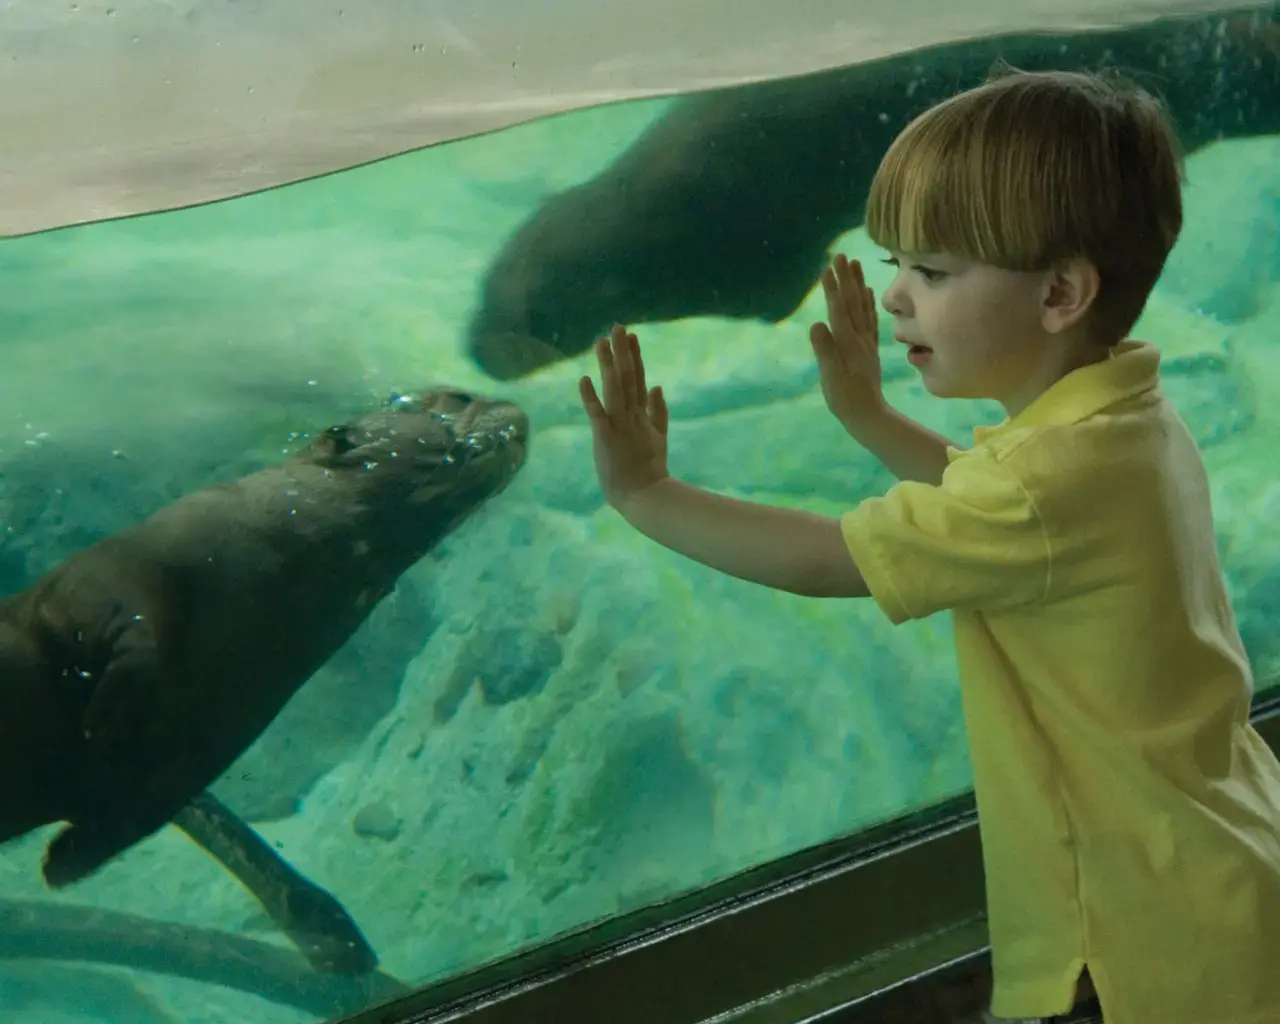 A young boy looks in amazement at a giant otter in Carnivore Kingdom. Courtesy of the Philadelphia Zoo.